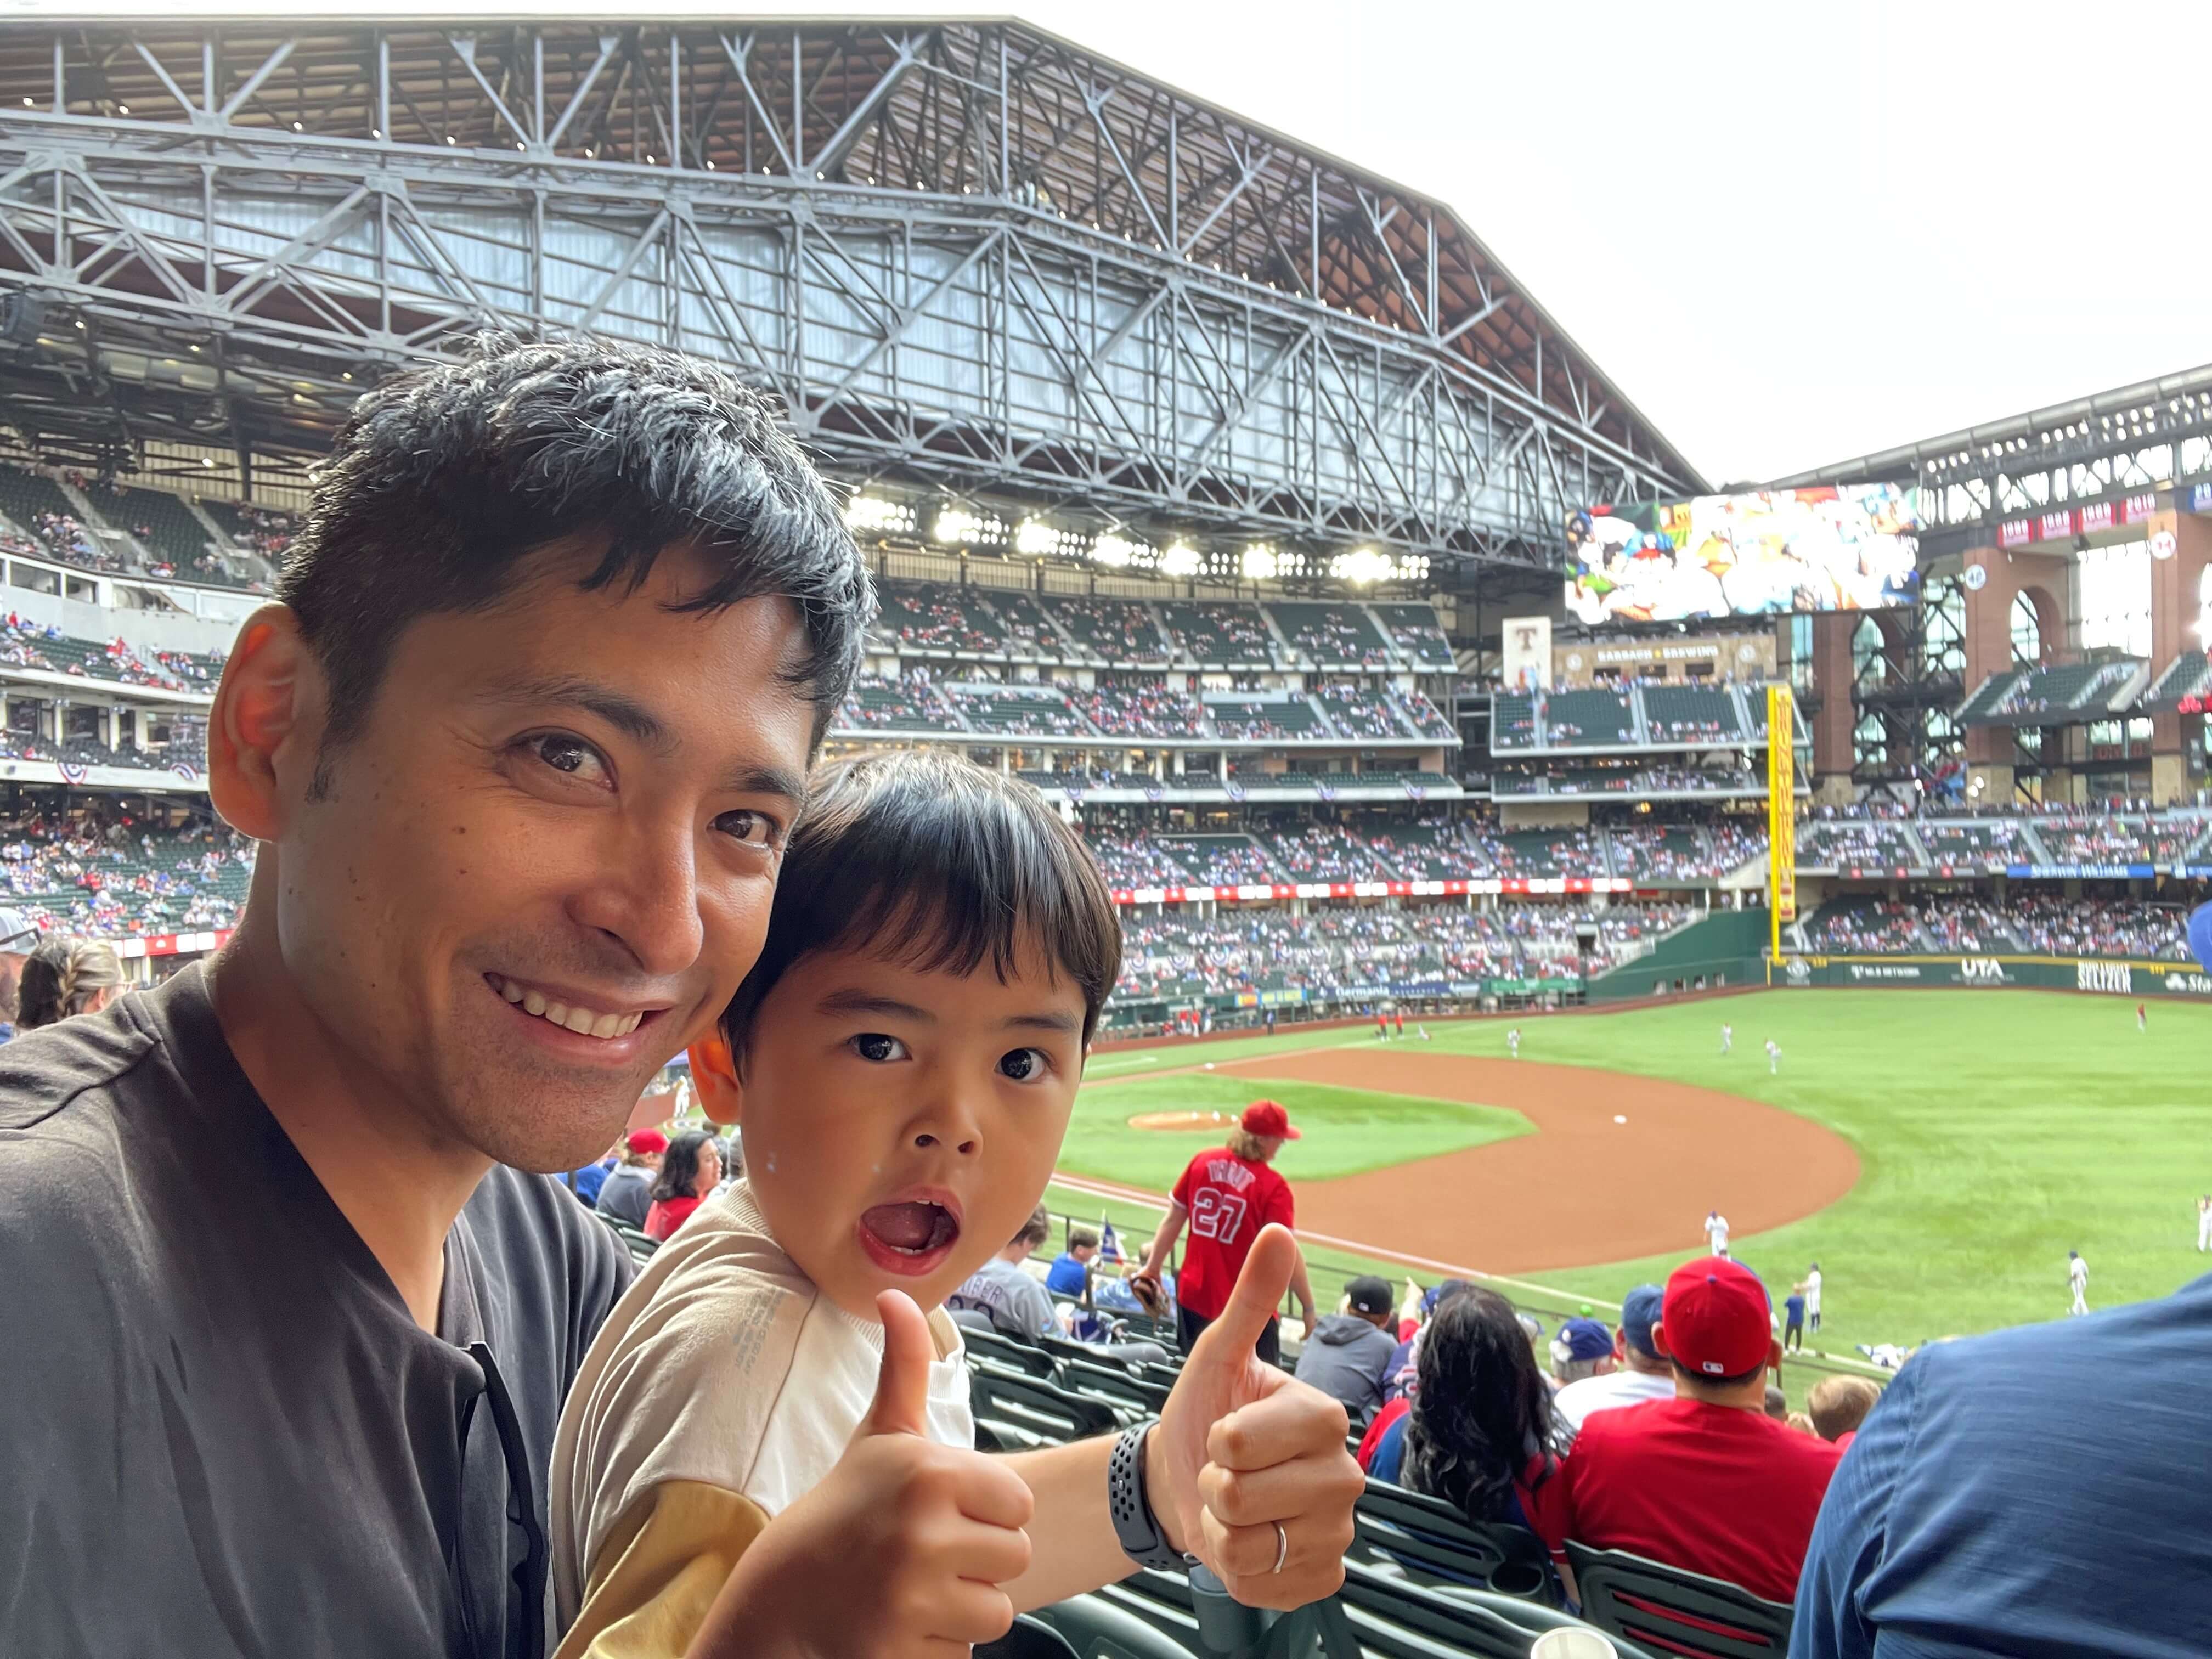 Ren with his son at a baseball game.